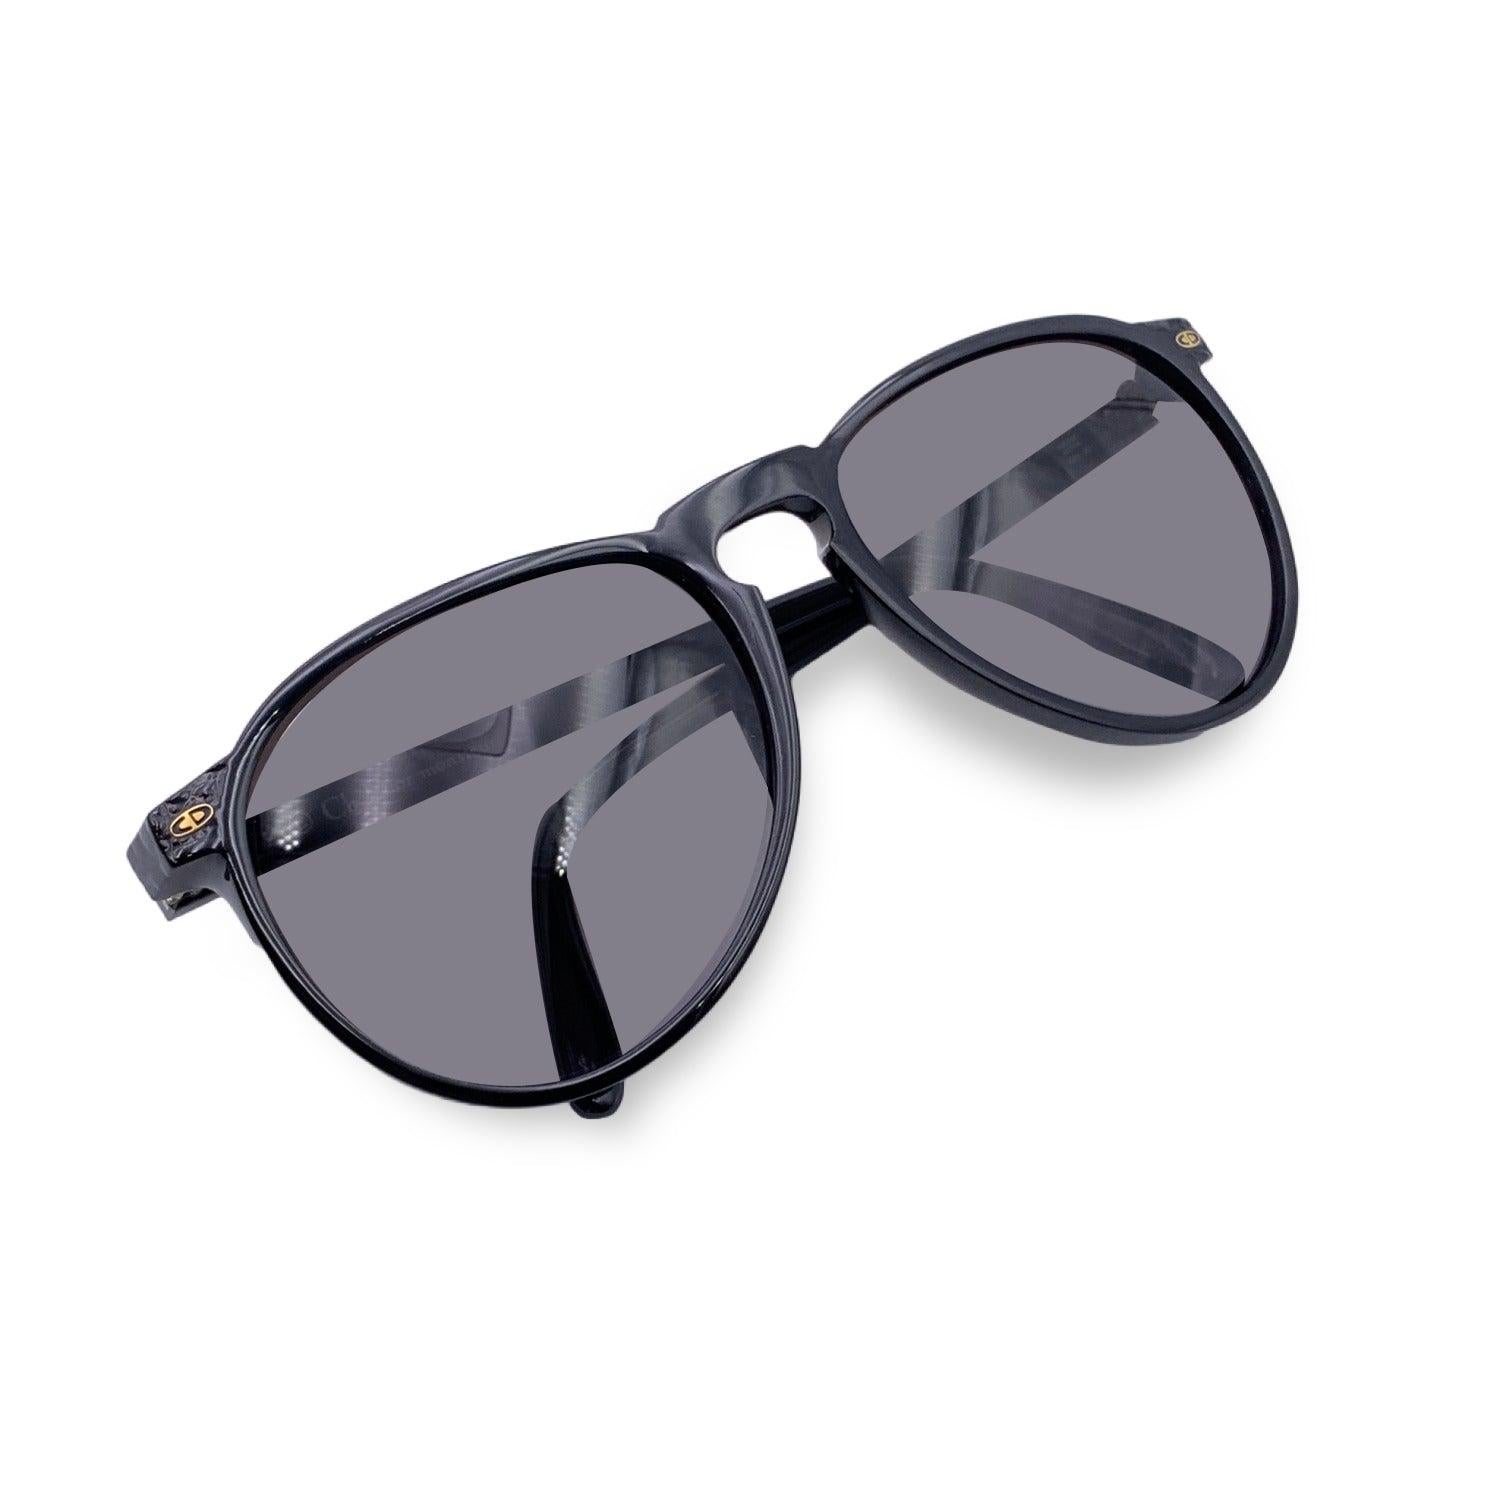 Vintage Christian Dior Monsieur Unisex Sunglasses, Mod. 2315 90 Optyl. Size: 60/14 135mm. Black acetate frame, with marble effect on the sides. 100% Total UVA/UVB protection grey gradient lenses. CD logos on the side front. Details MATERIAL: Plastic